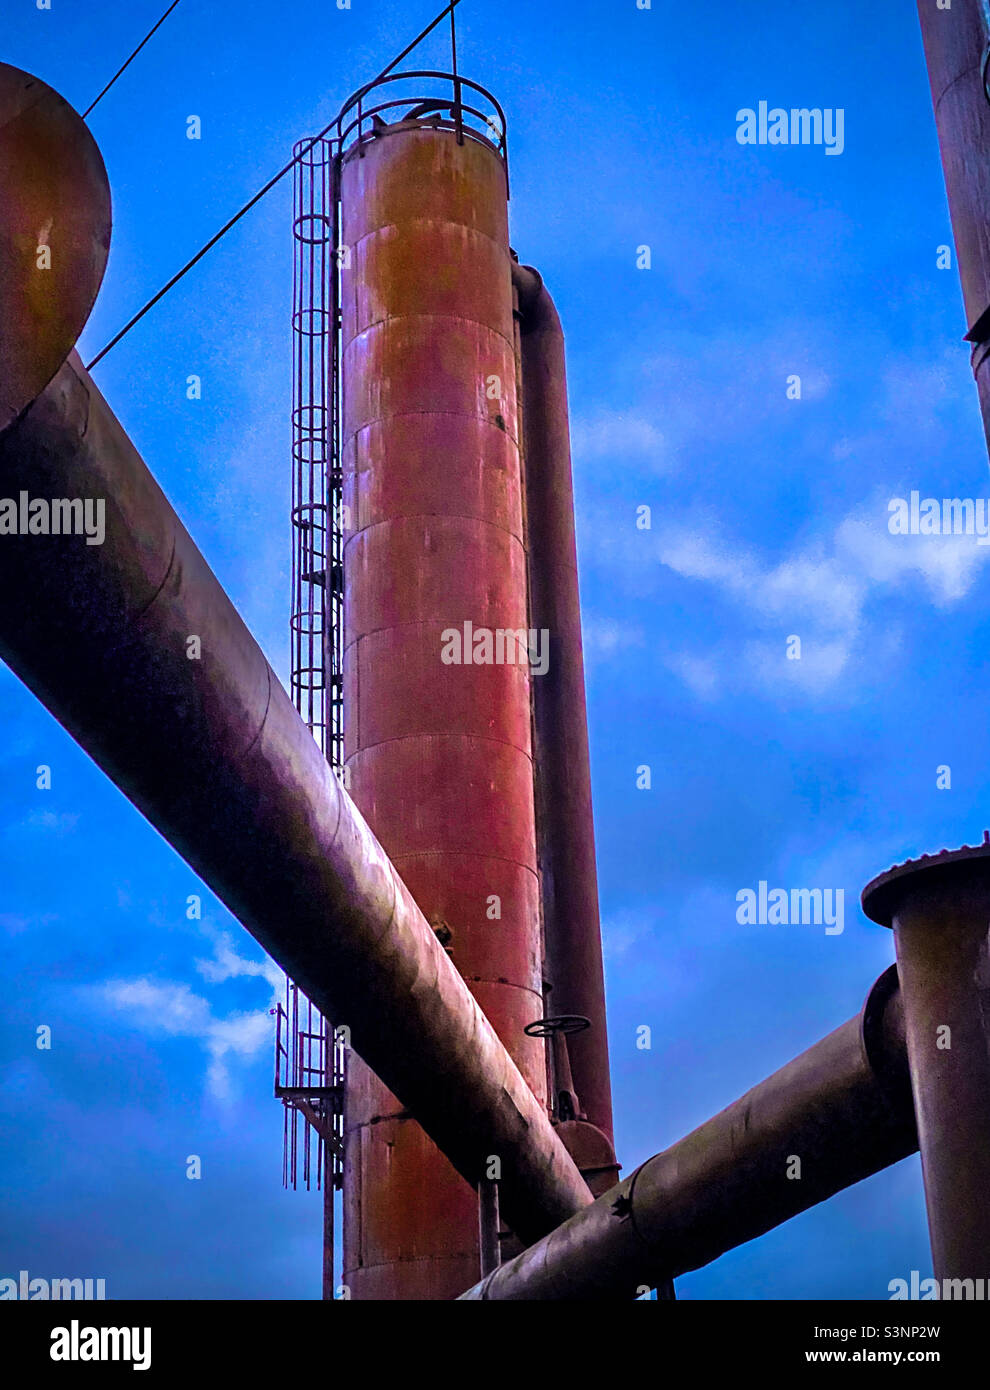 Pipes and exhaust towers from a defunct industrial steam works plant Stock Photo